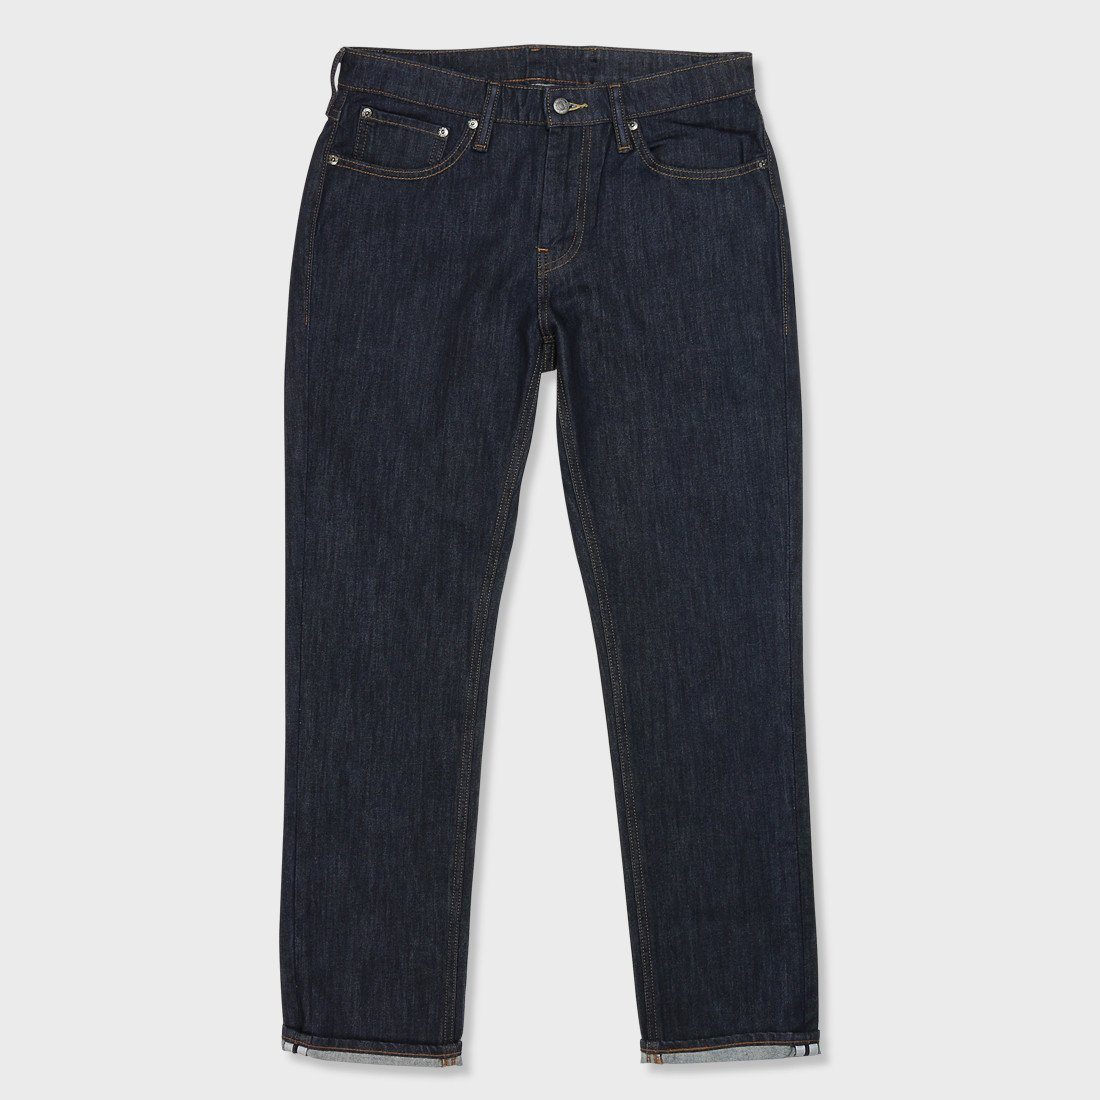 levi's 511 cycling jeans